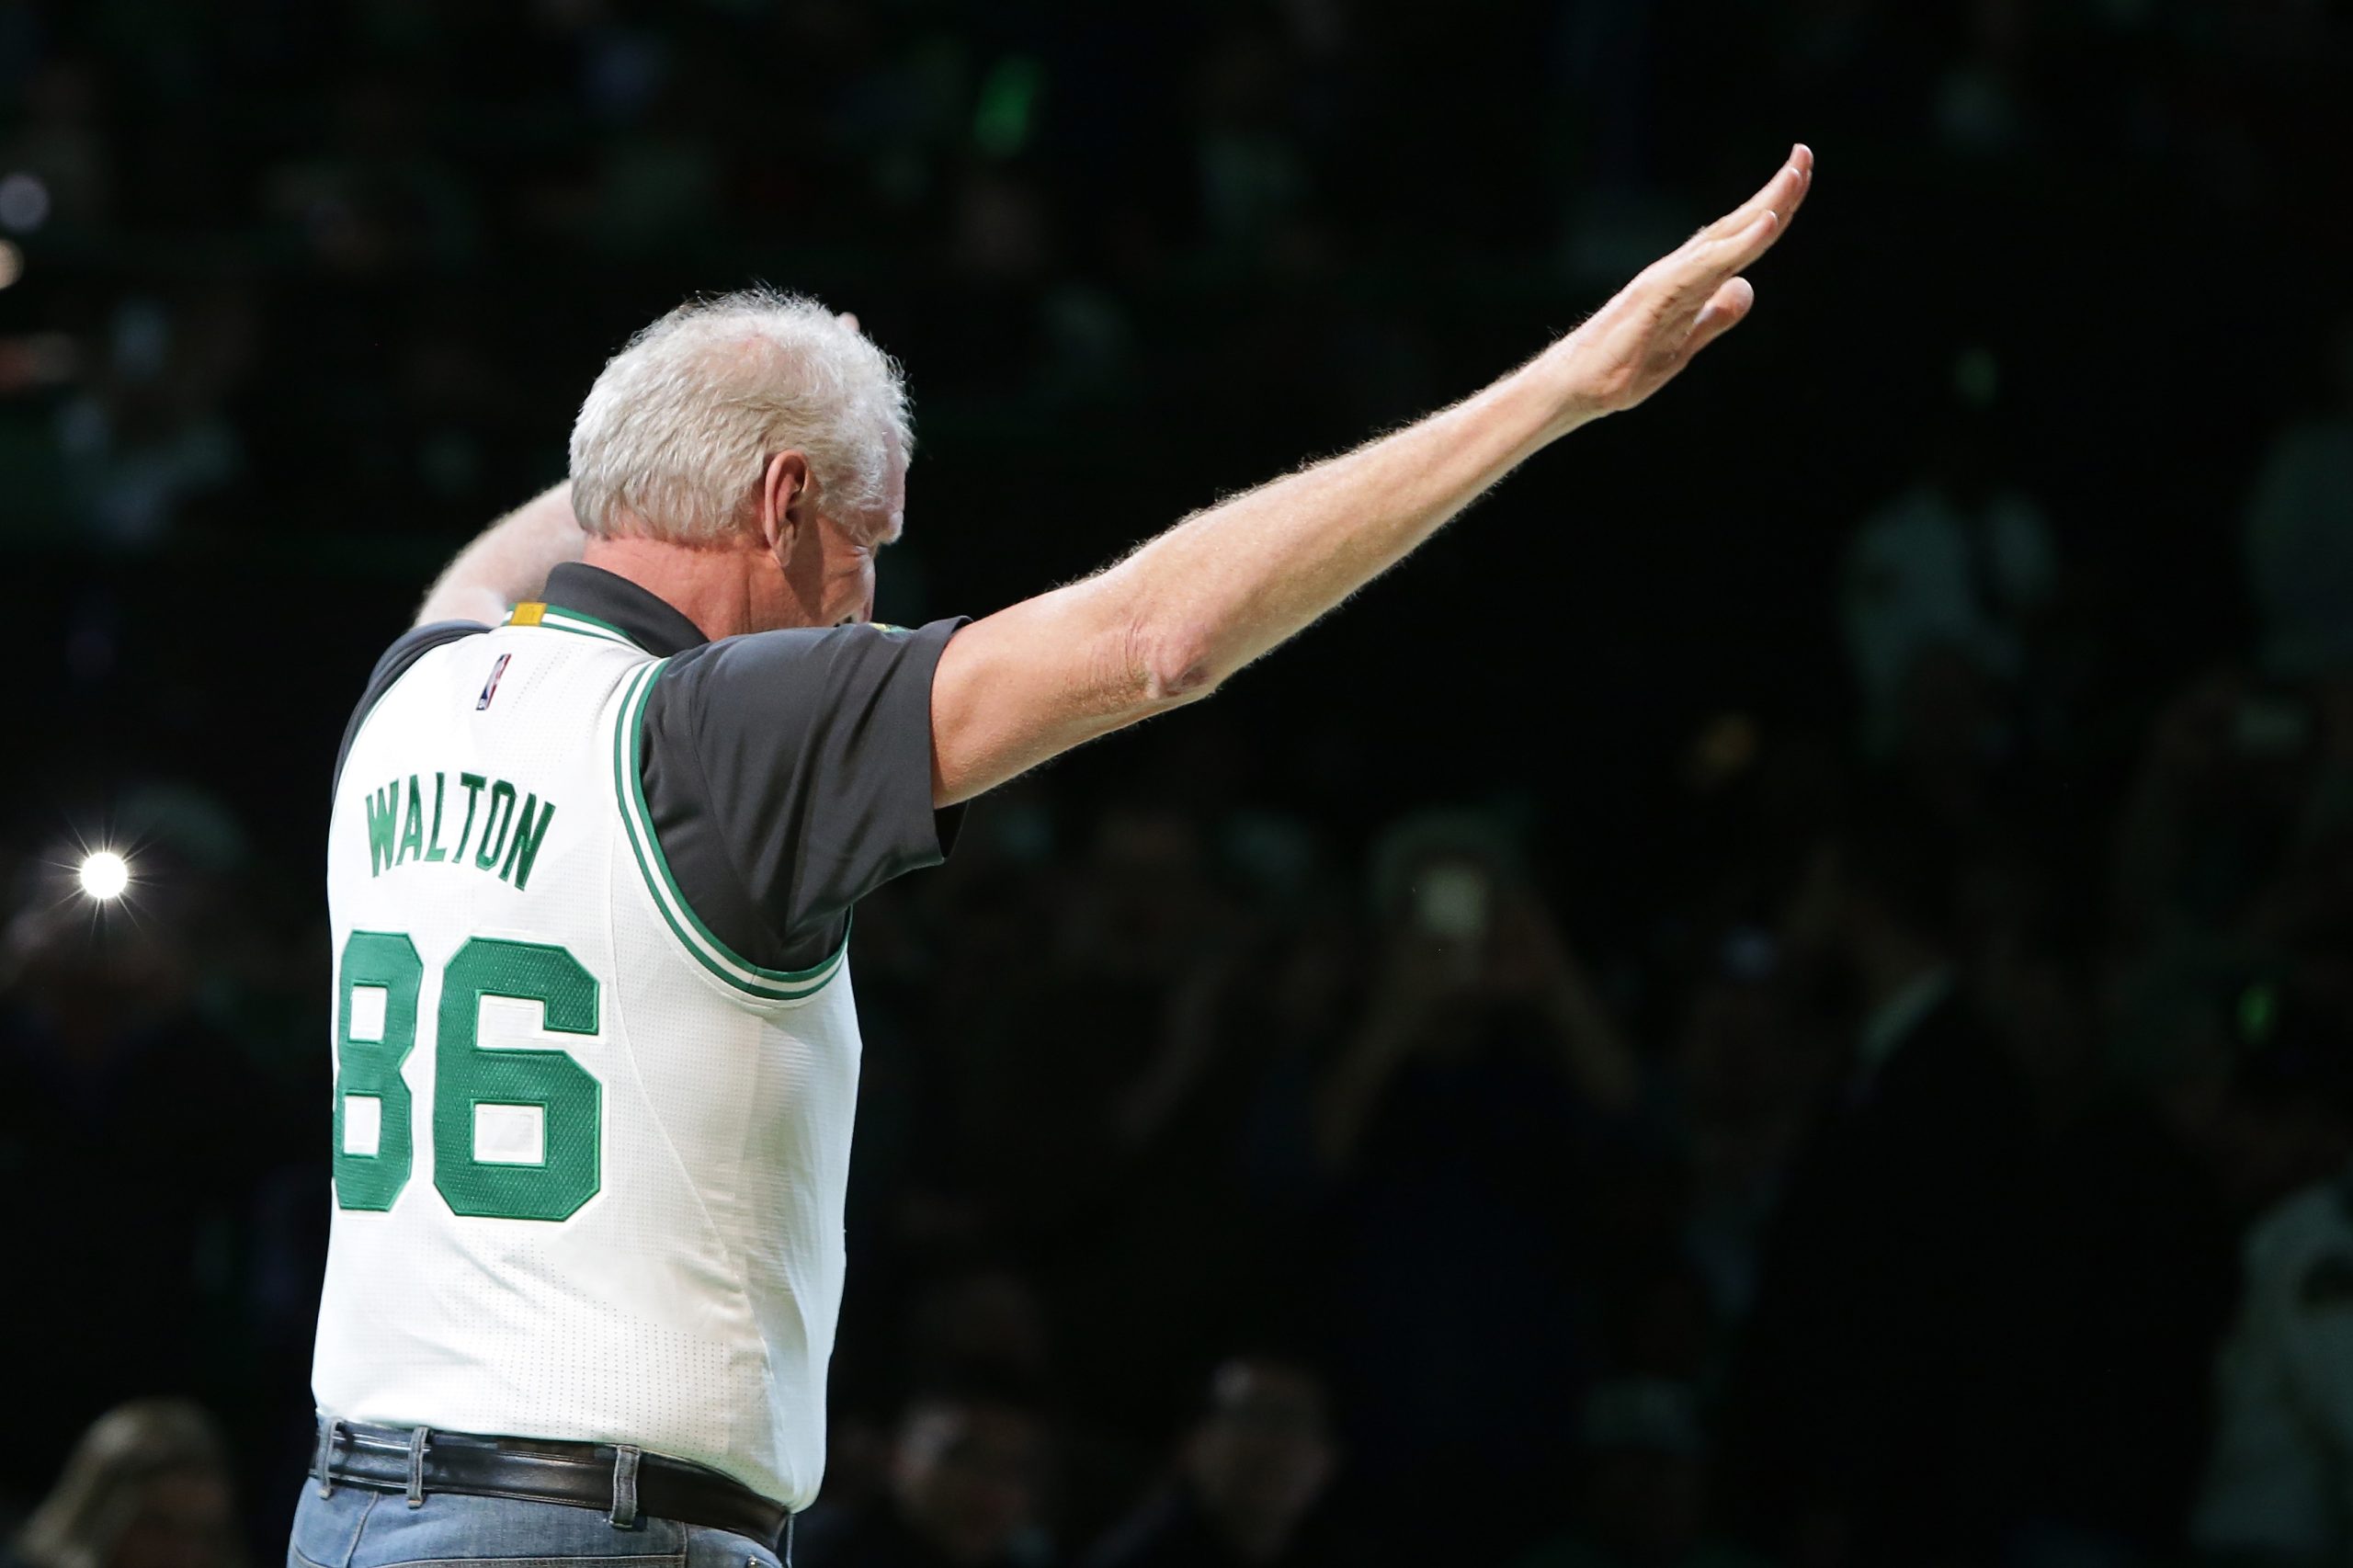 Member of the Boston Celtics 1986 championship team Bill Walton is honored at halftime of the game between the Boston Celtics and Miami Heat.